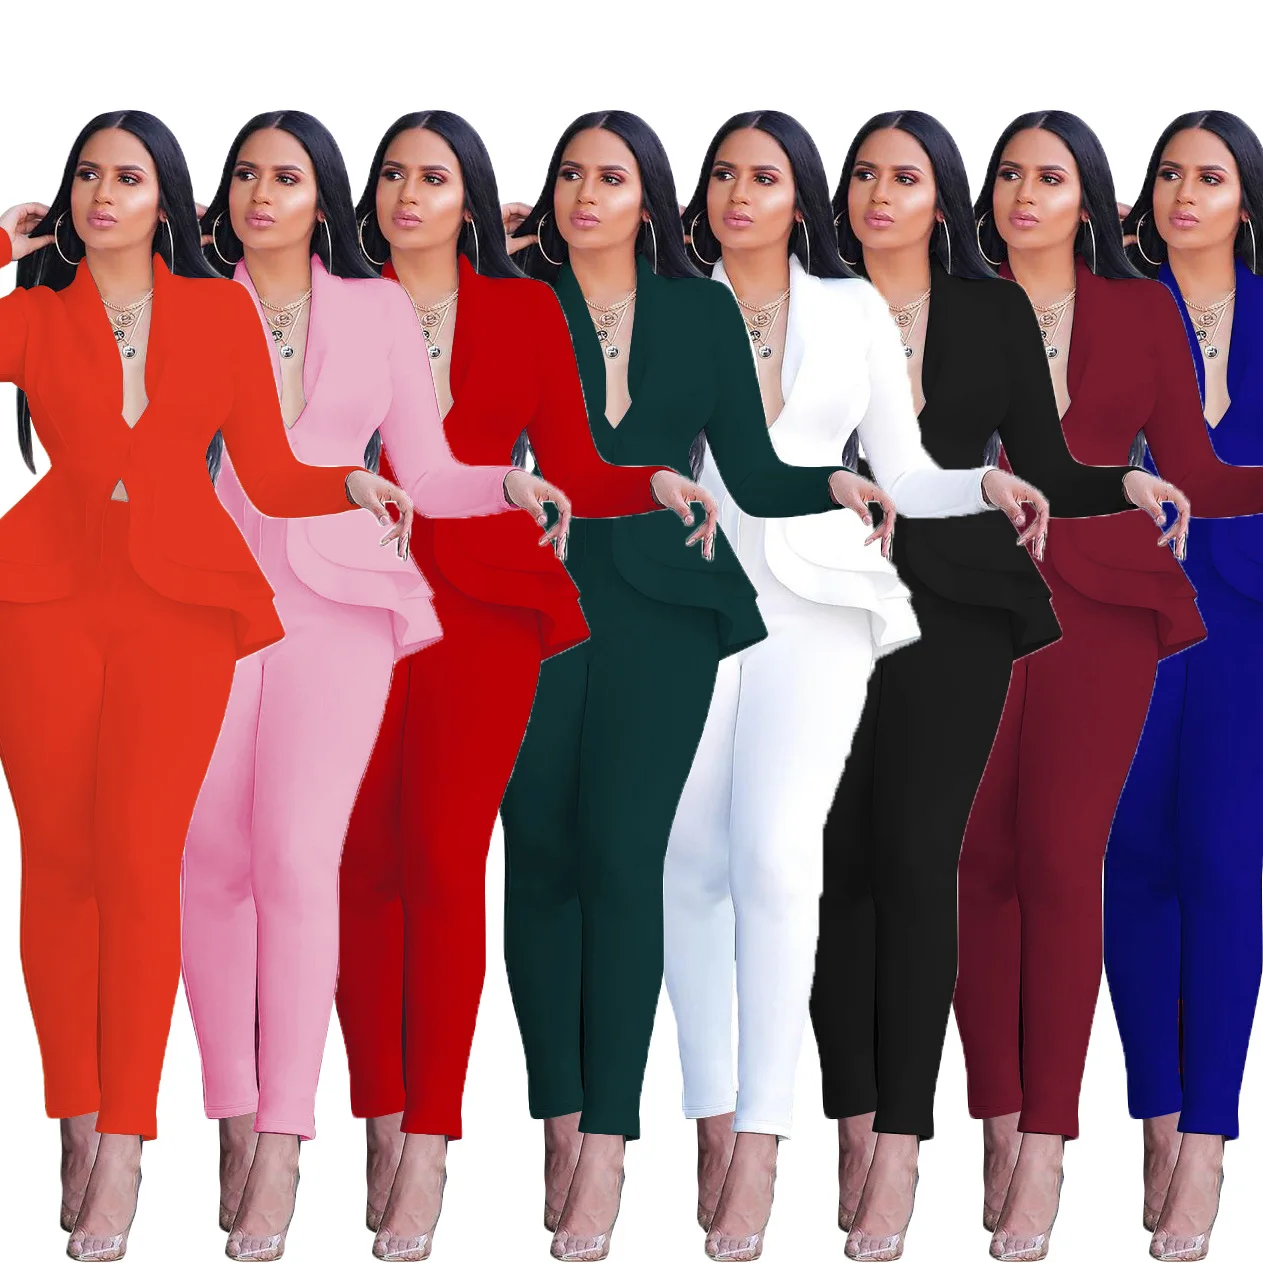 Womens 2 Piece Outfits Long Sleeve High Low Peplum Blouse Top and Straight Fit Dress Pants Business Suits Sets 